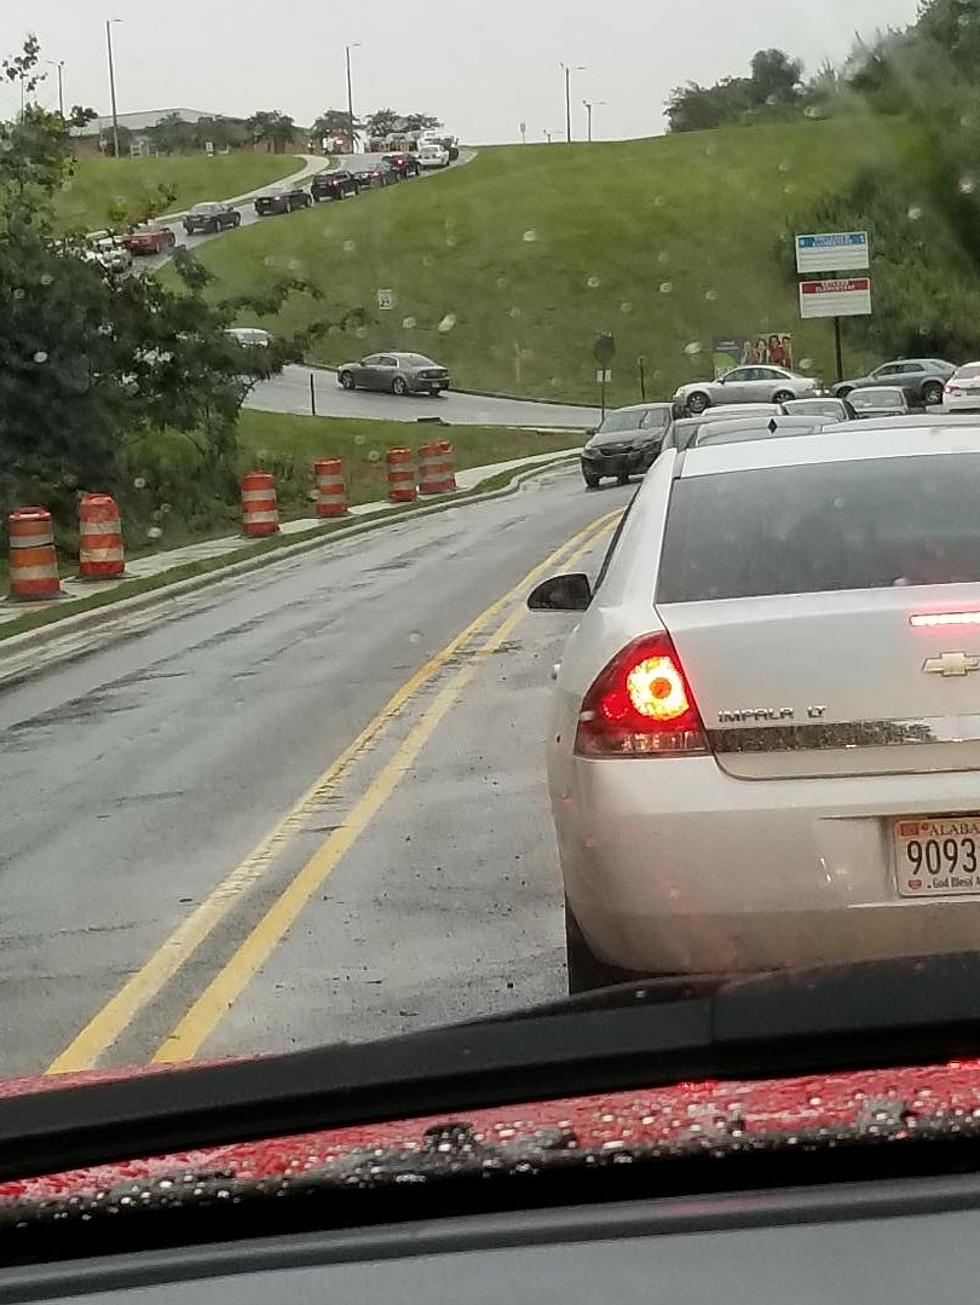 Parents, Prepare Yourselves: Back-To-School Traffic Is a Nightmare